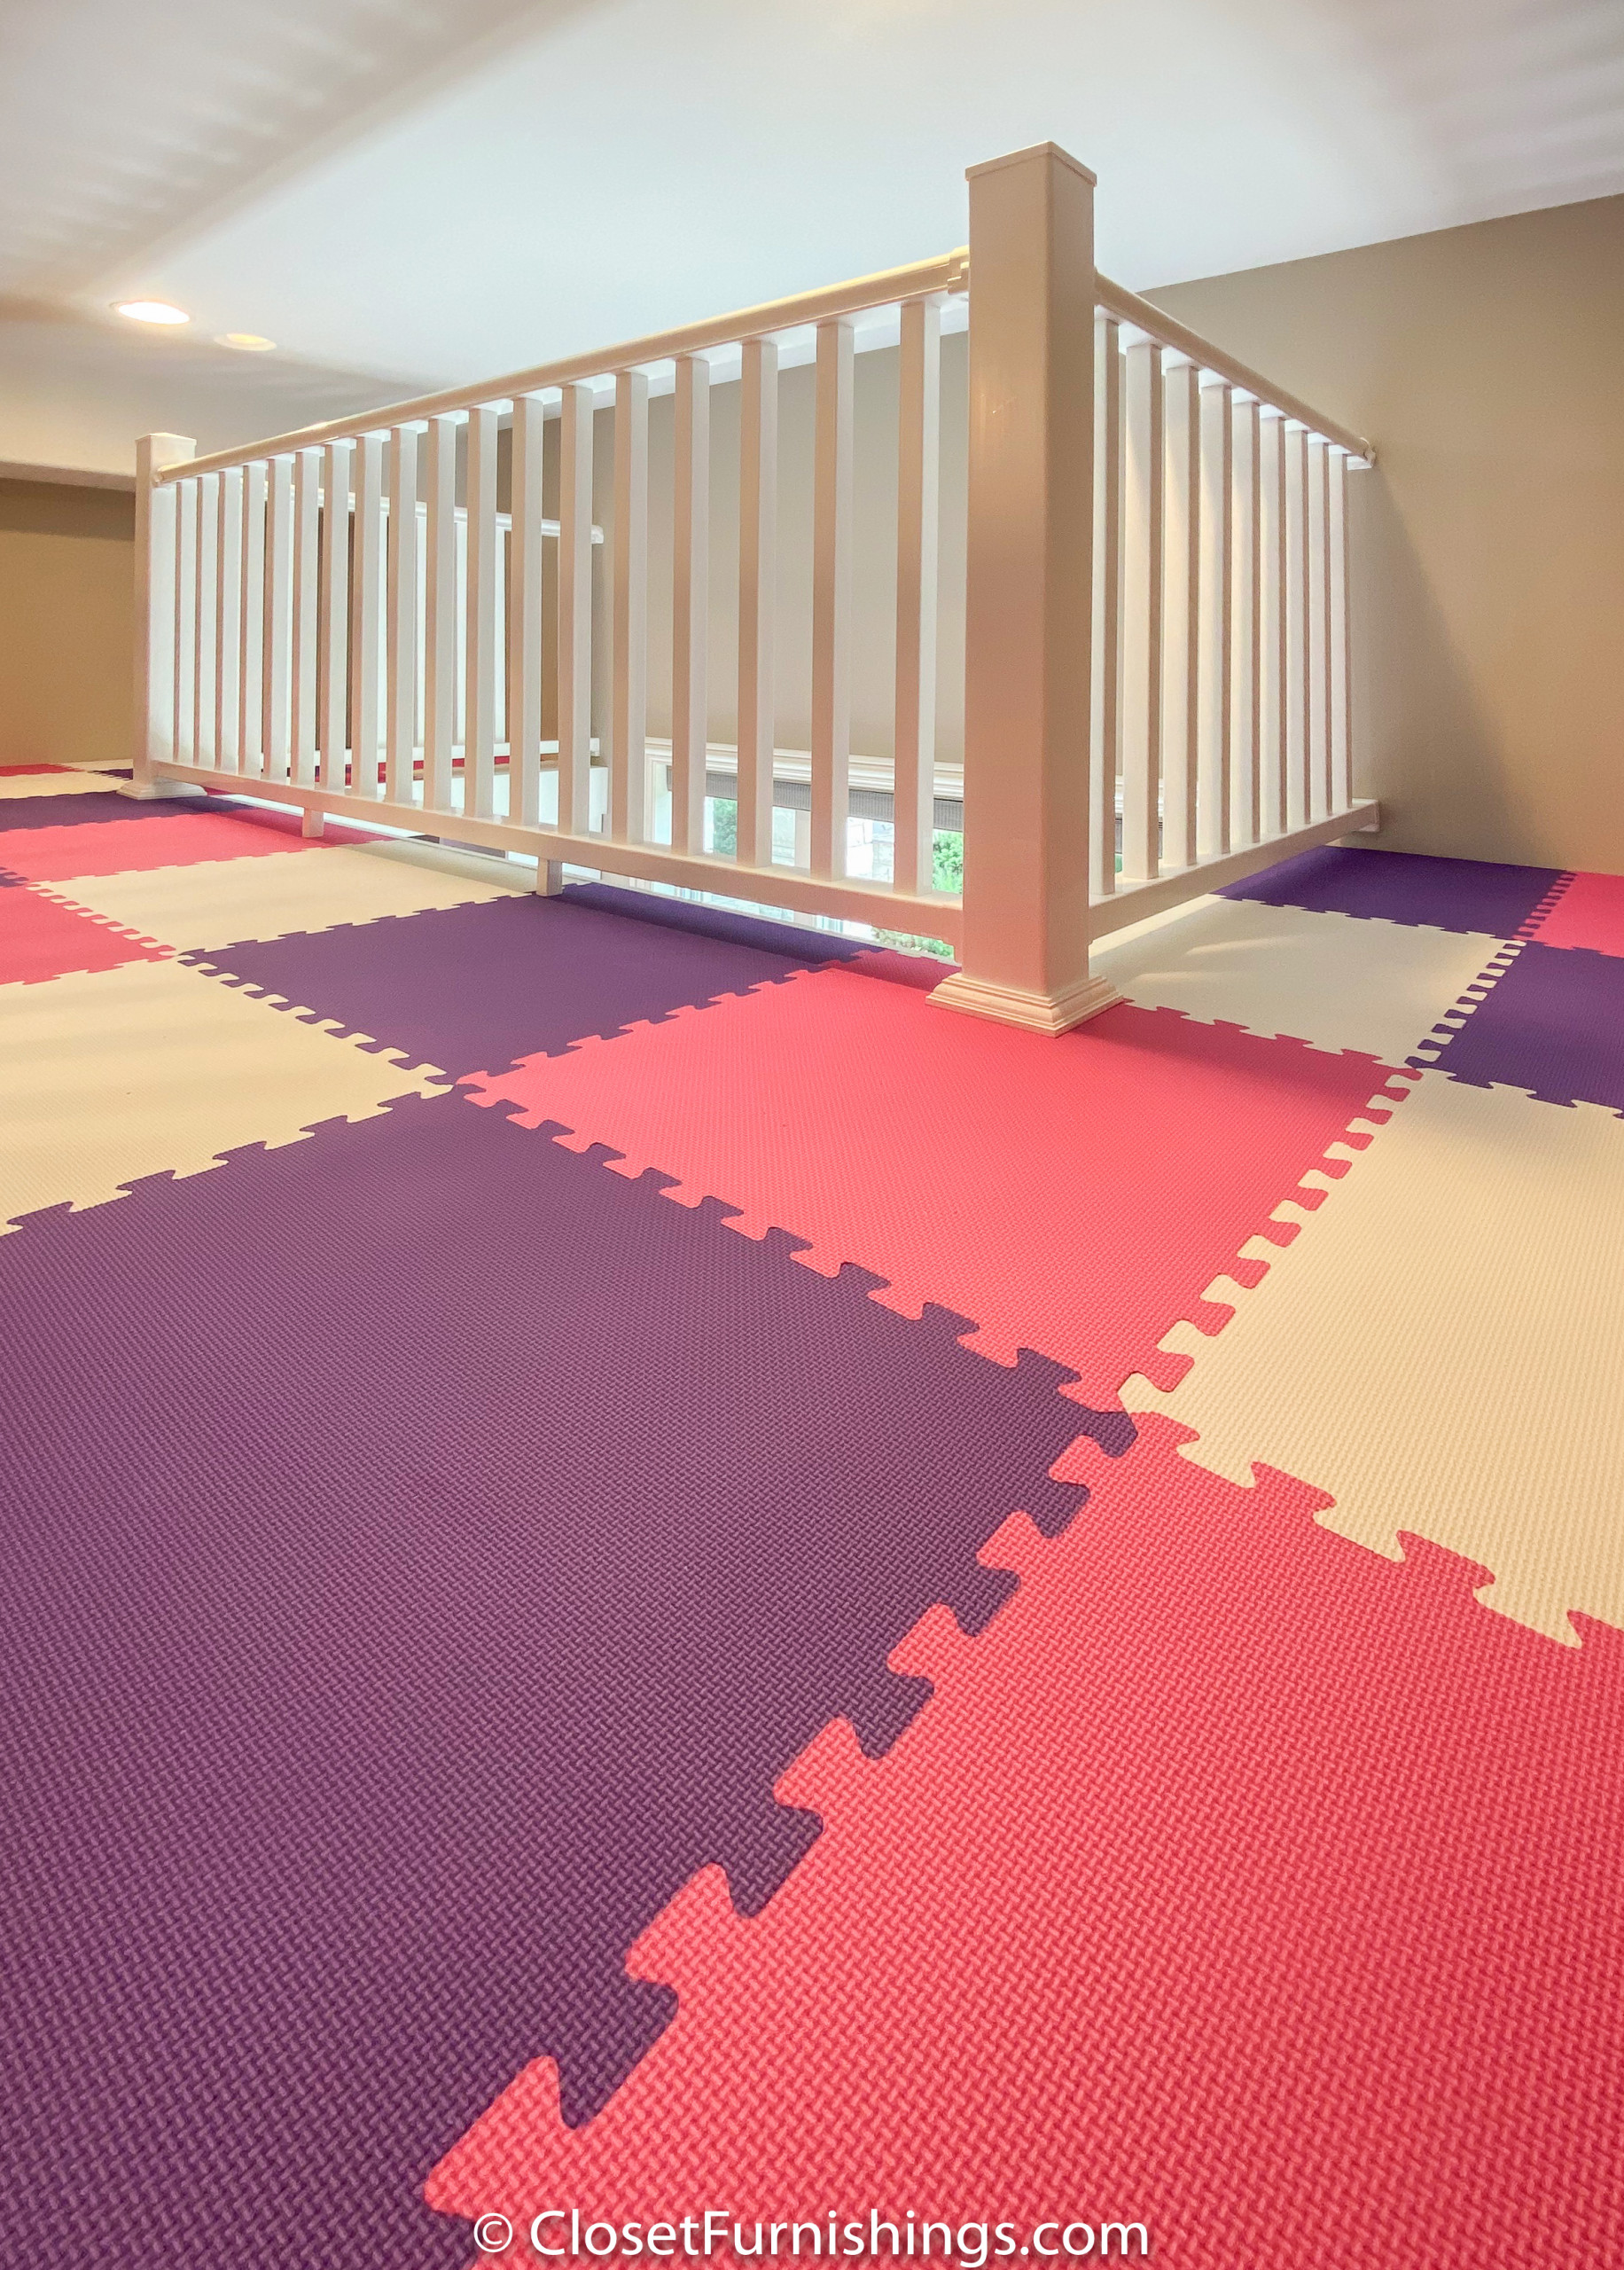 Playroom and Exercise Rooms